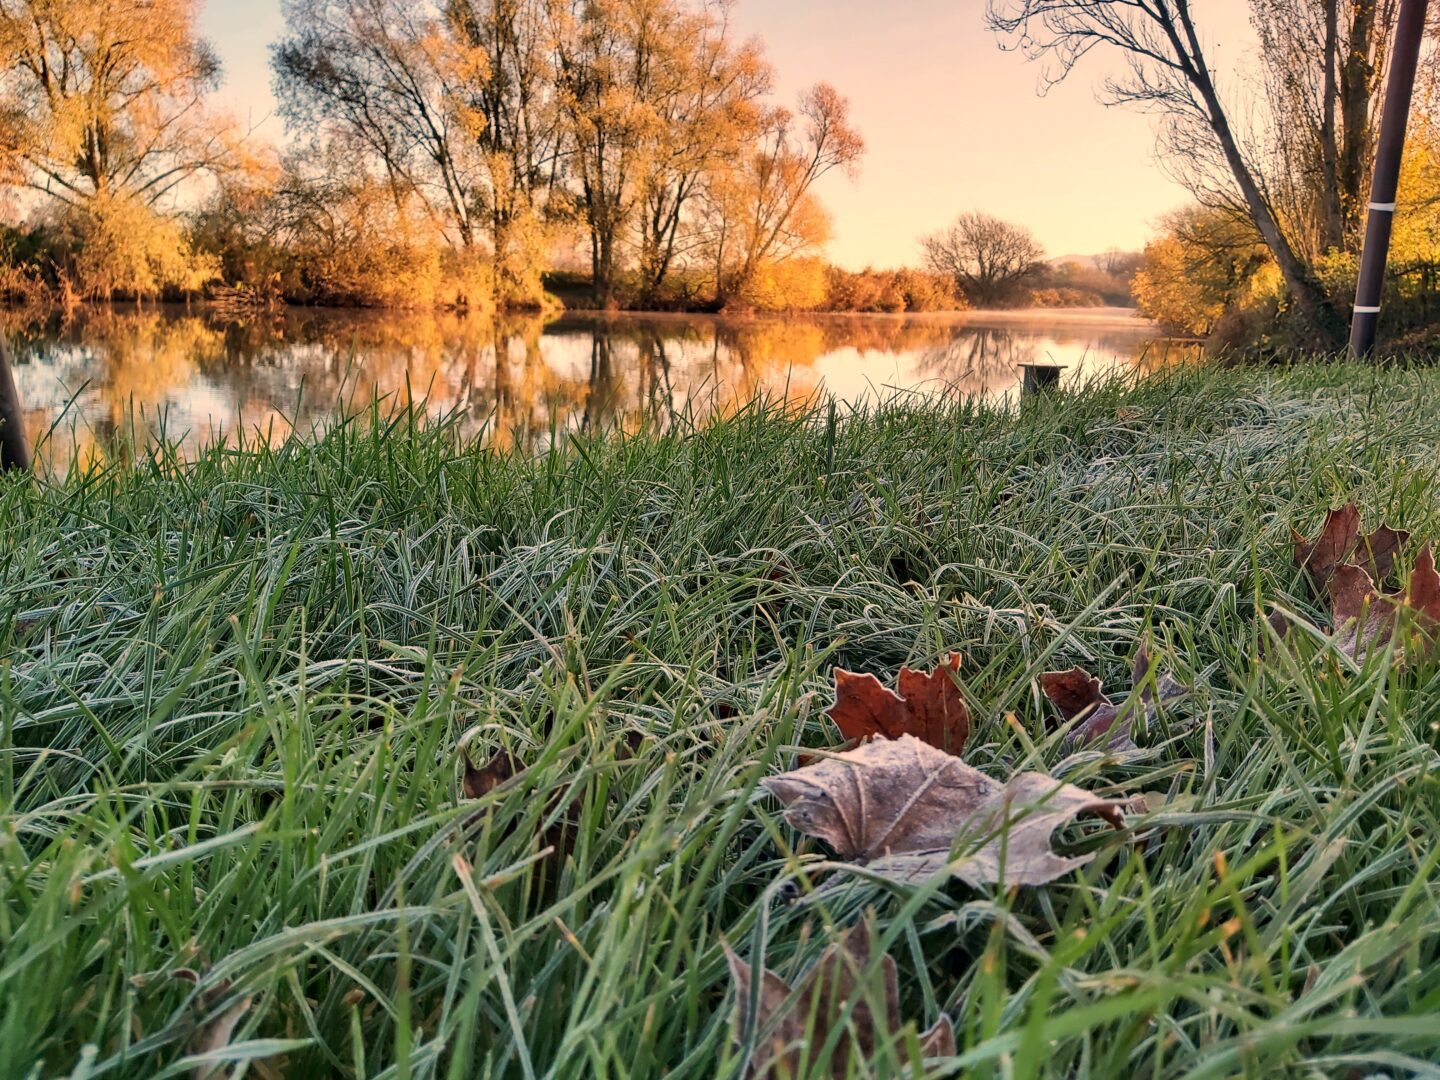 Frosty grass with river at sunrise in the background to illustrate warming up after cold water swimming for mental health